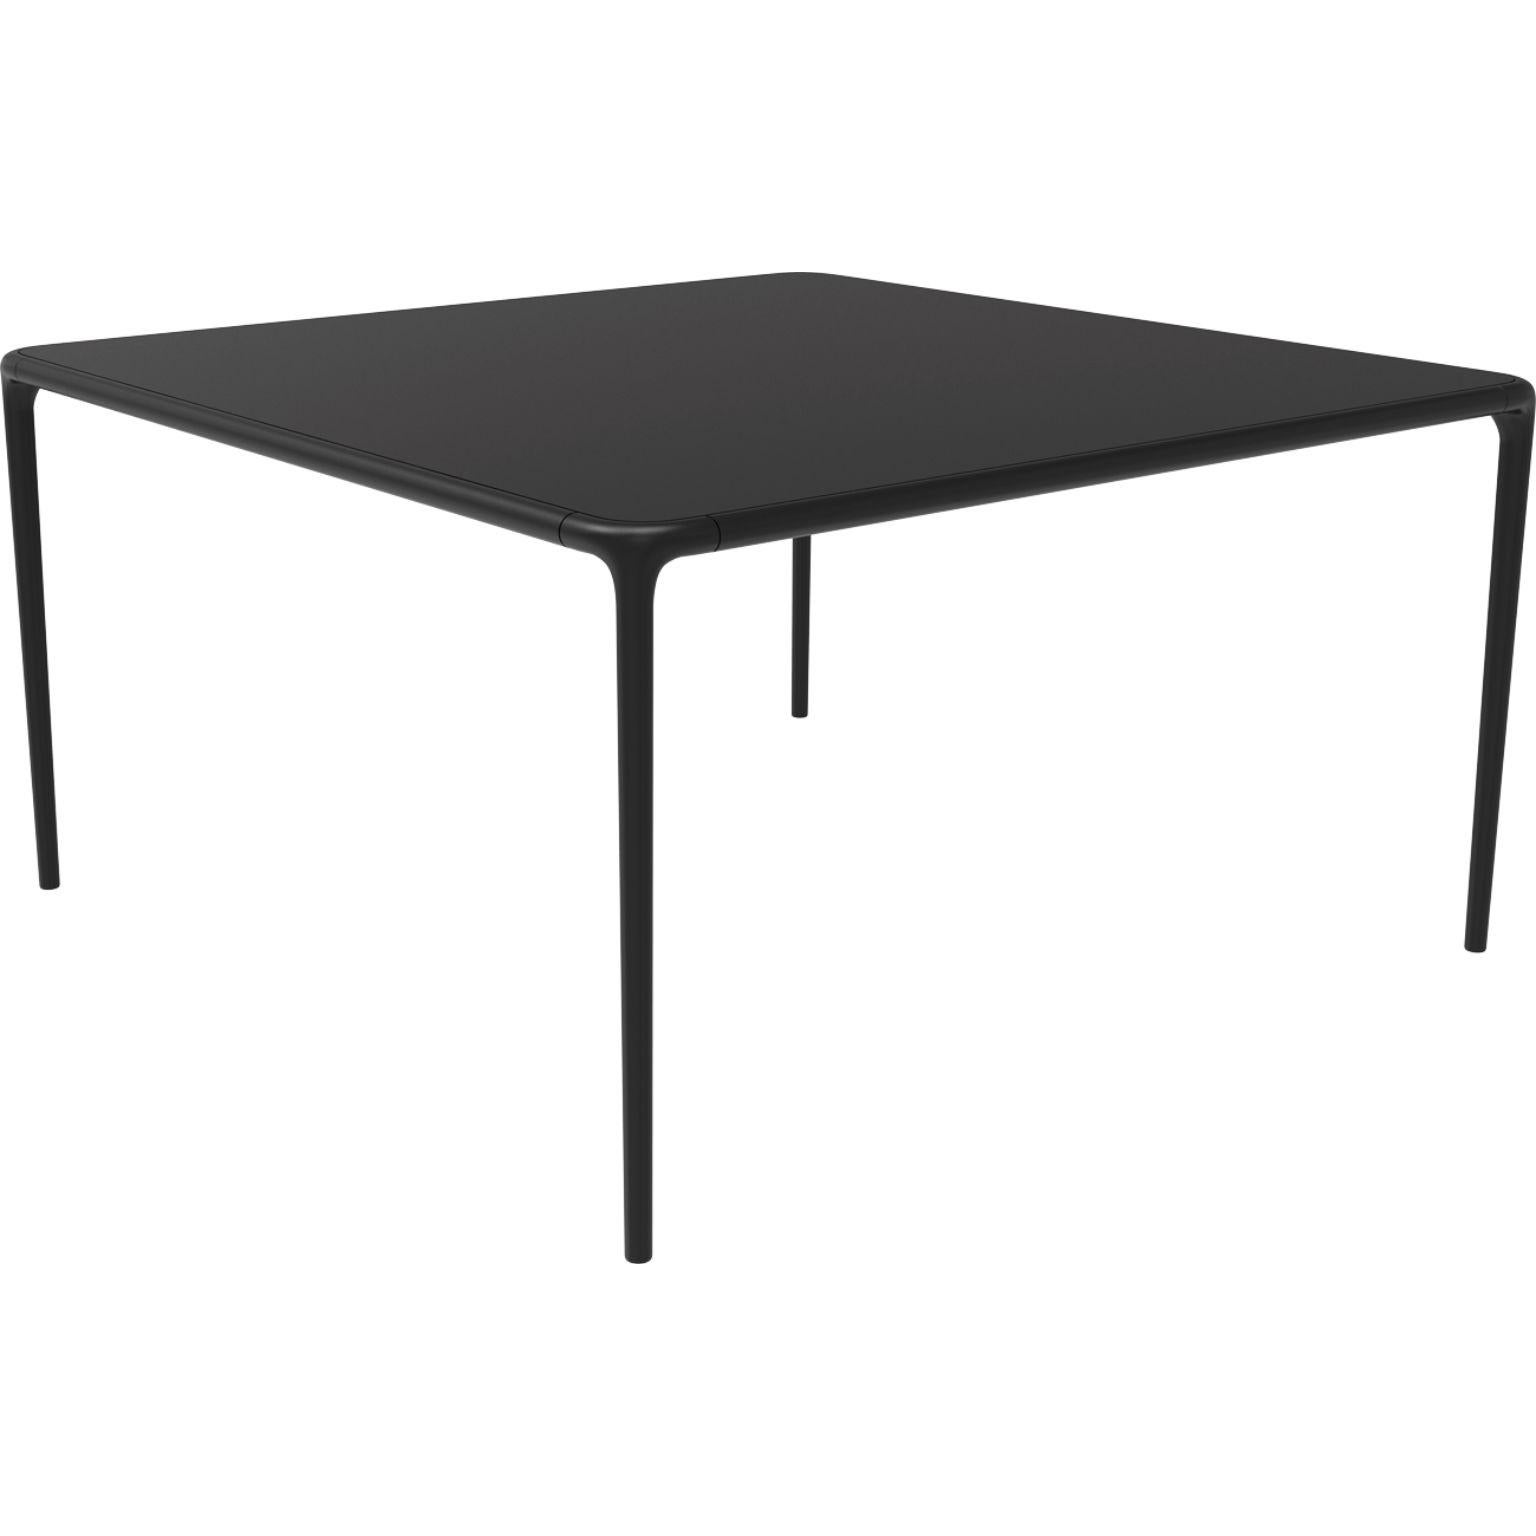 Xaloc black glass top table 140 by MOWEE
Dimensions: D140 x W140 x H74 cm
Material: Aluminum, tinted tempered glass top.
Also available in different aluminum colors and finishes (HPL Black Edge or Neolith). 

Xaloc synthesizes the lines of